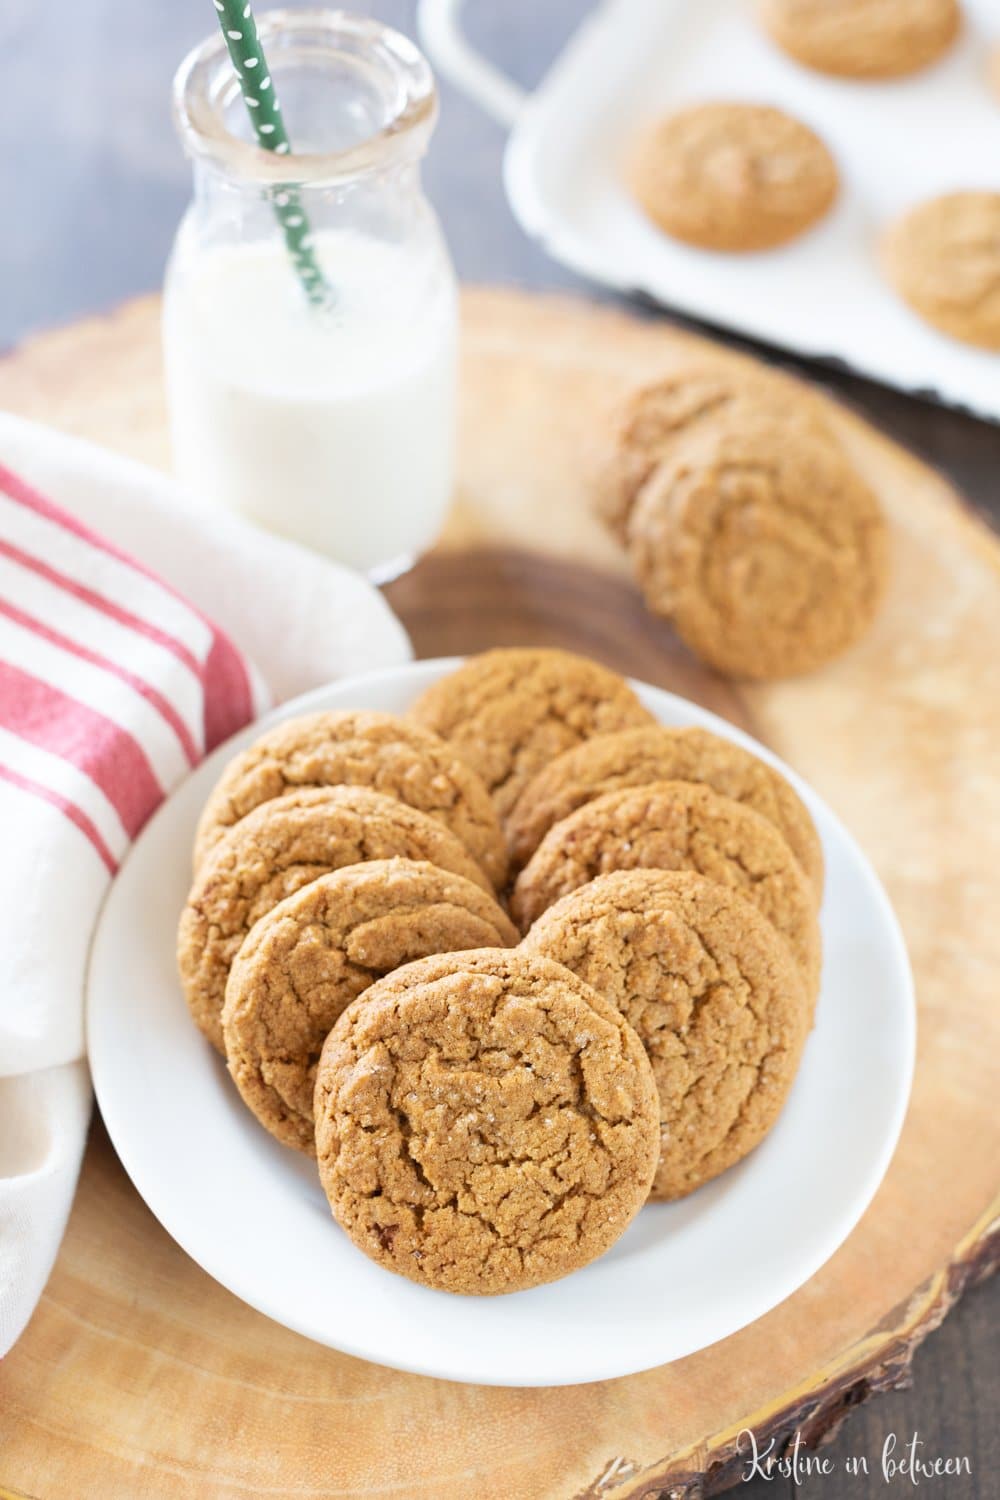 A traditional soft and chewy gingersnap cookie that comes out perfect every time!